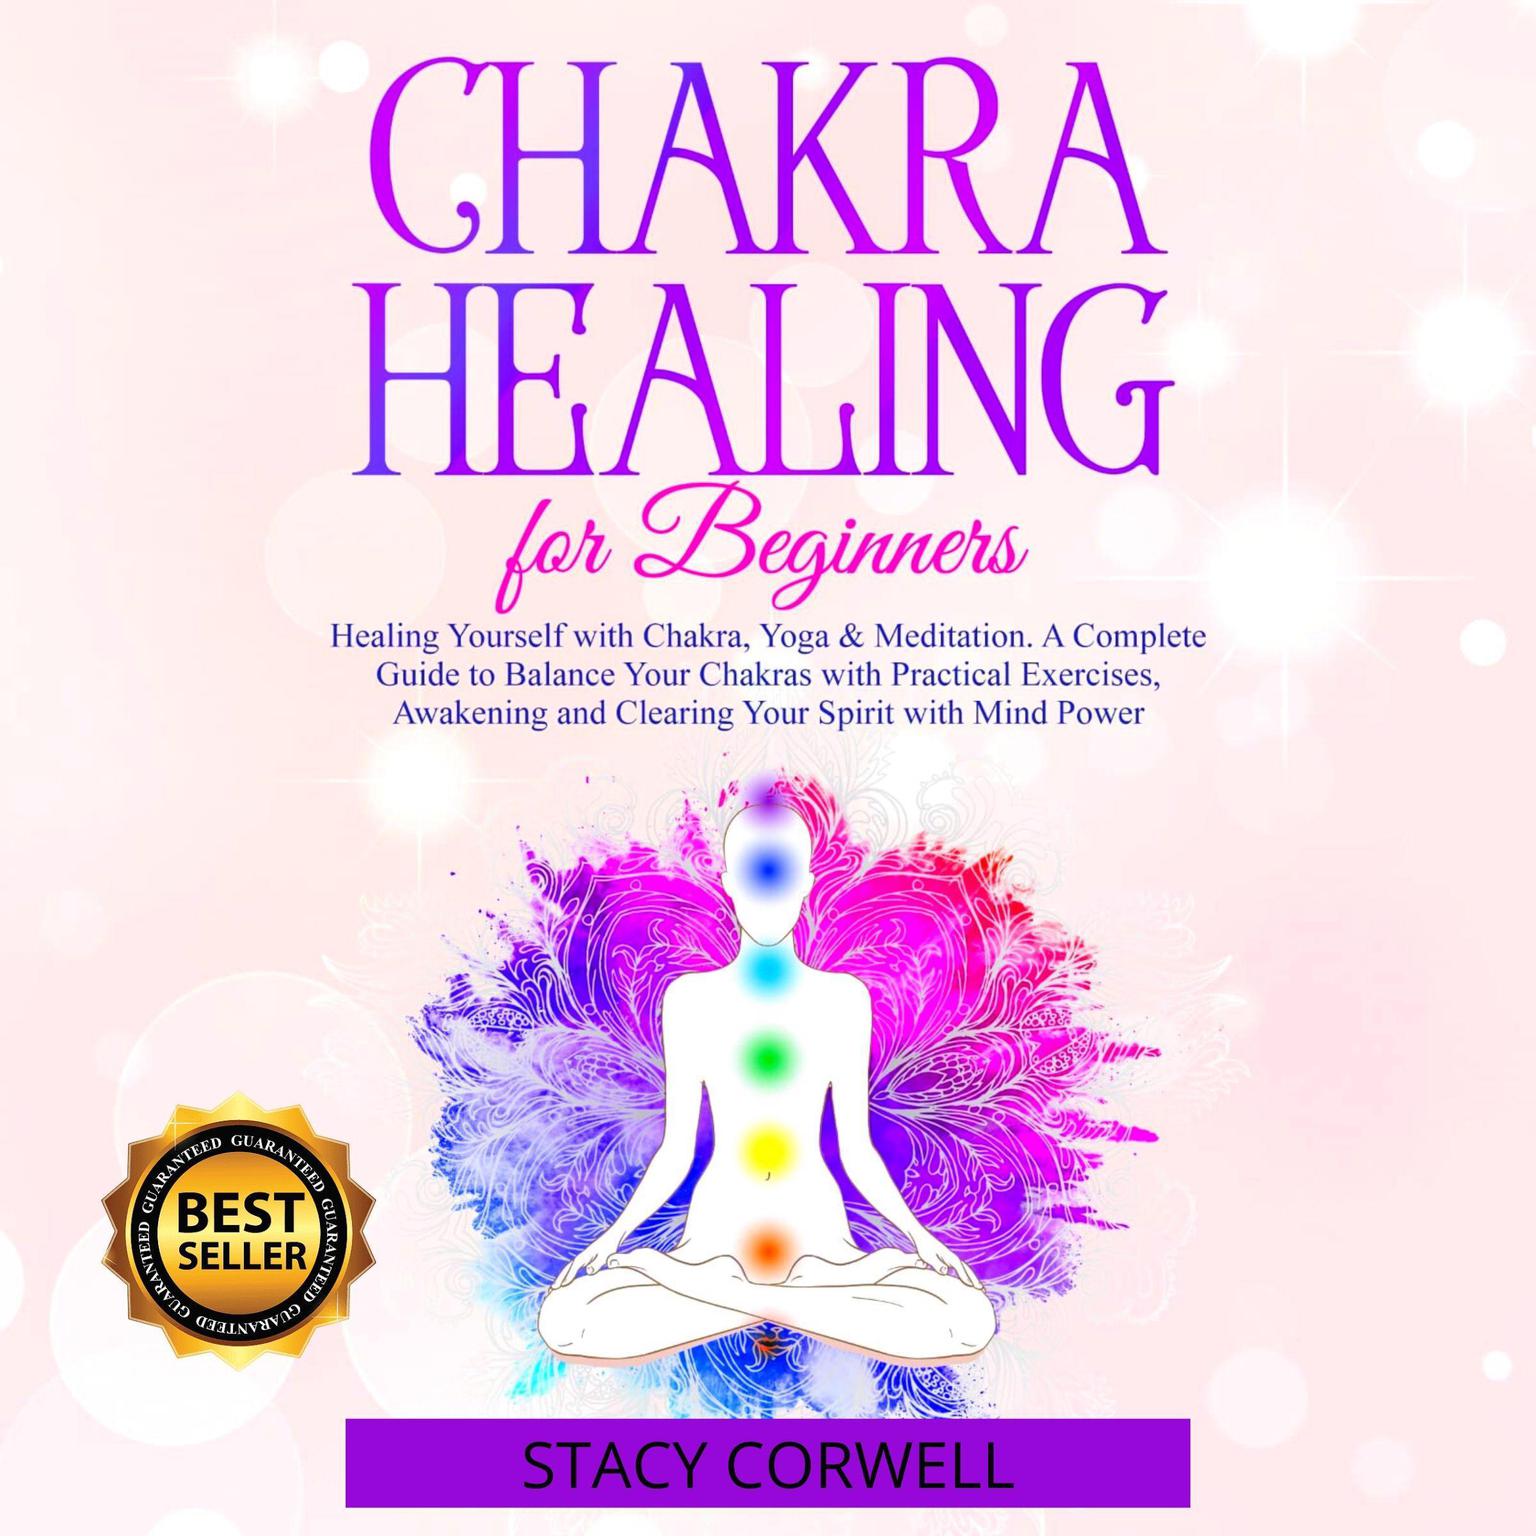 Chakra Healing for Beginners: Heal Yourself with Chakras, Yoga & Meditation. A Complete Guide to Balance Your Body with Practical Exercises, Awakening and Clearing Your Spirit with Mind Power Audiobook, by Stacy Corwell